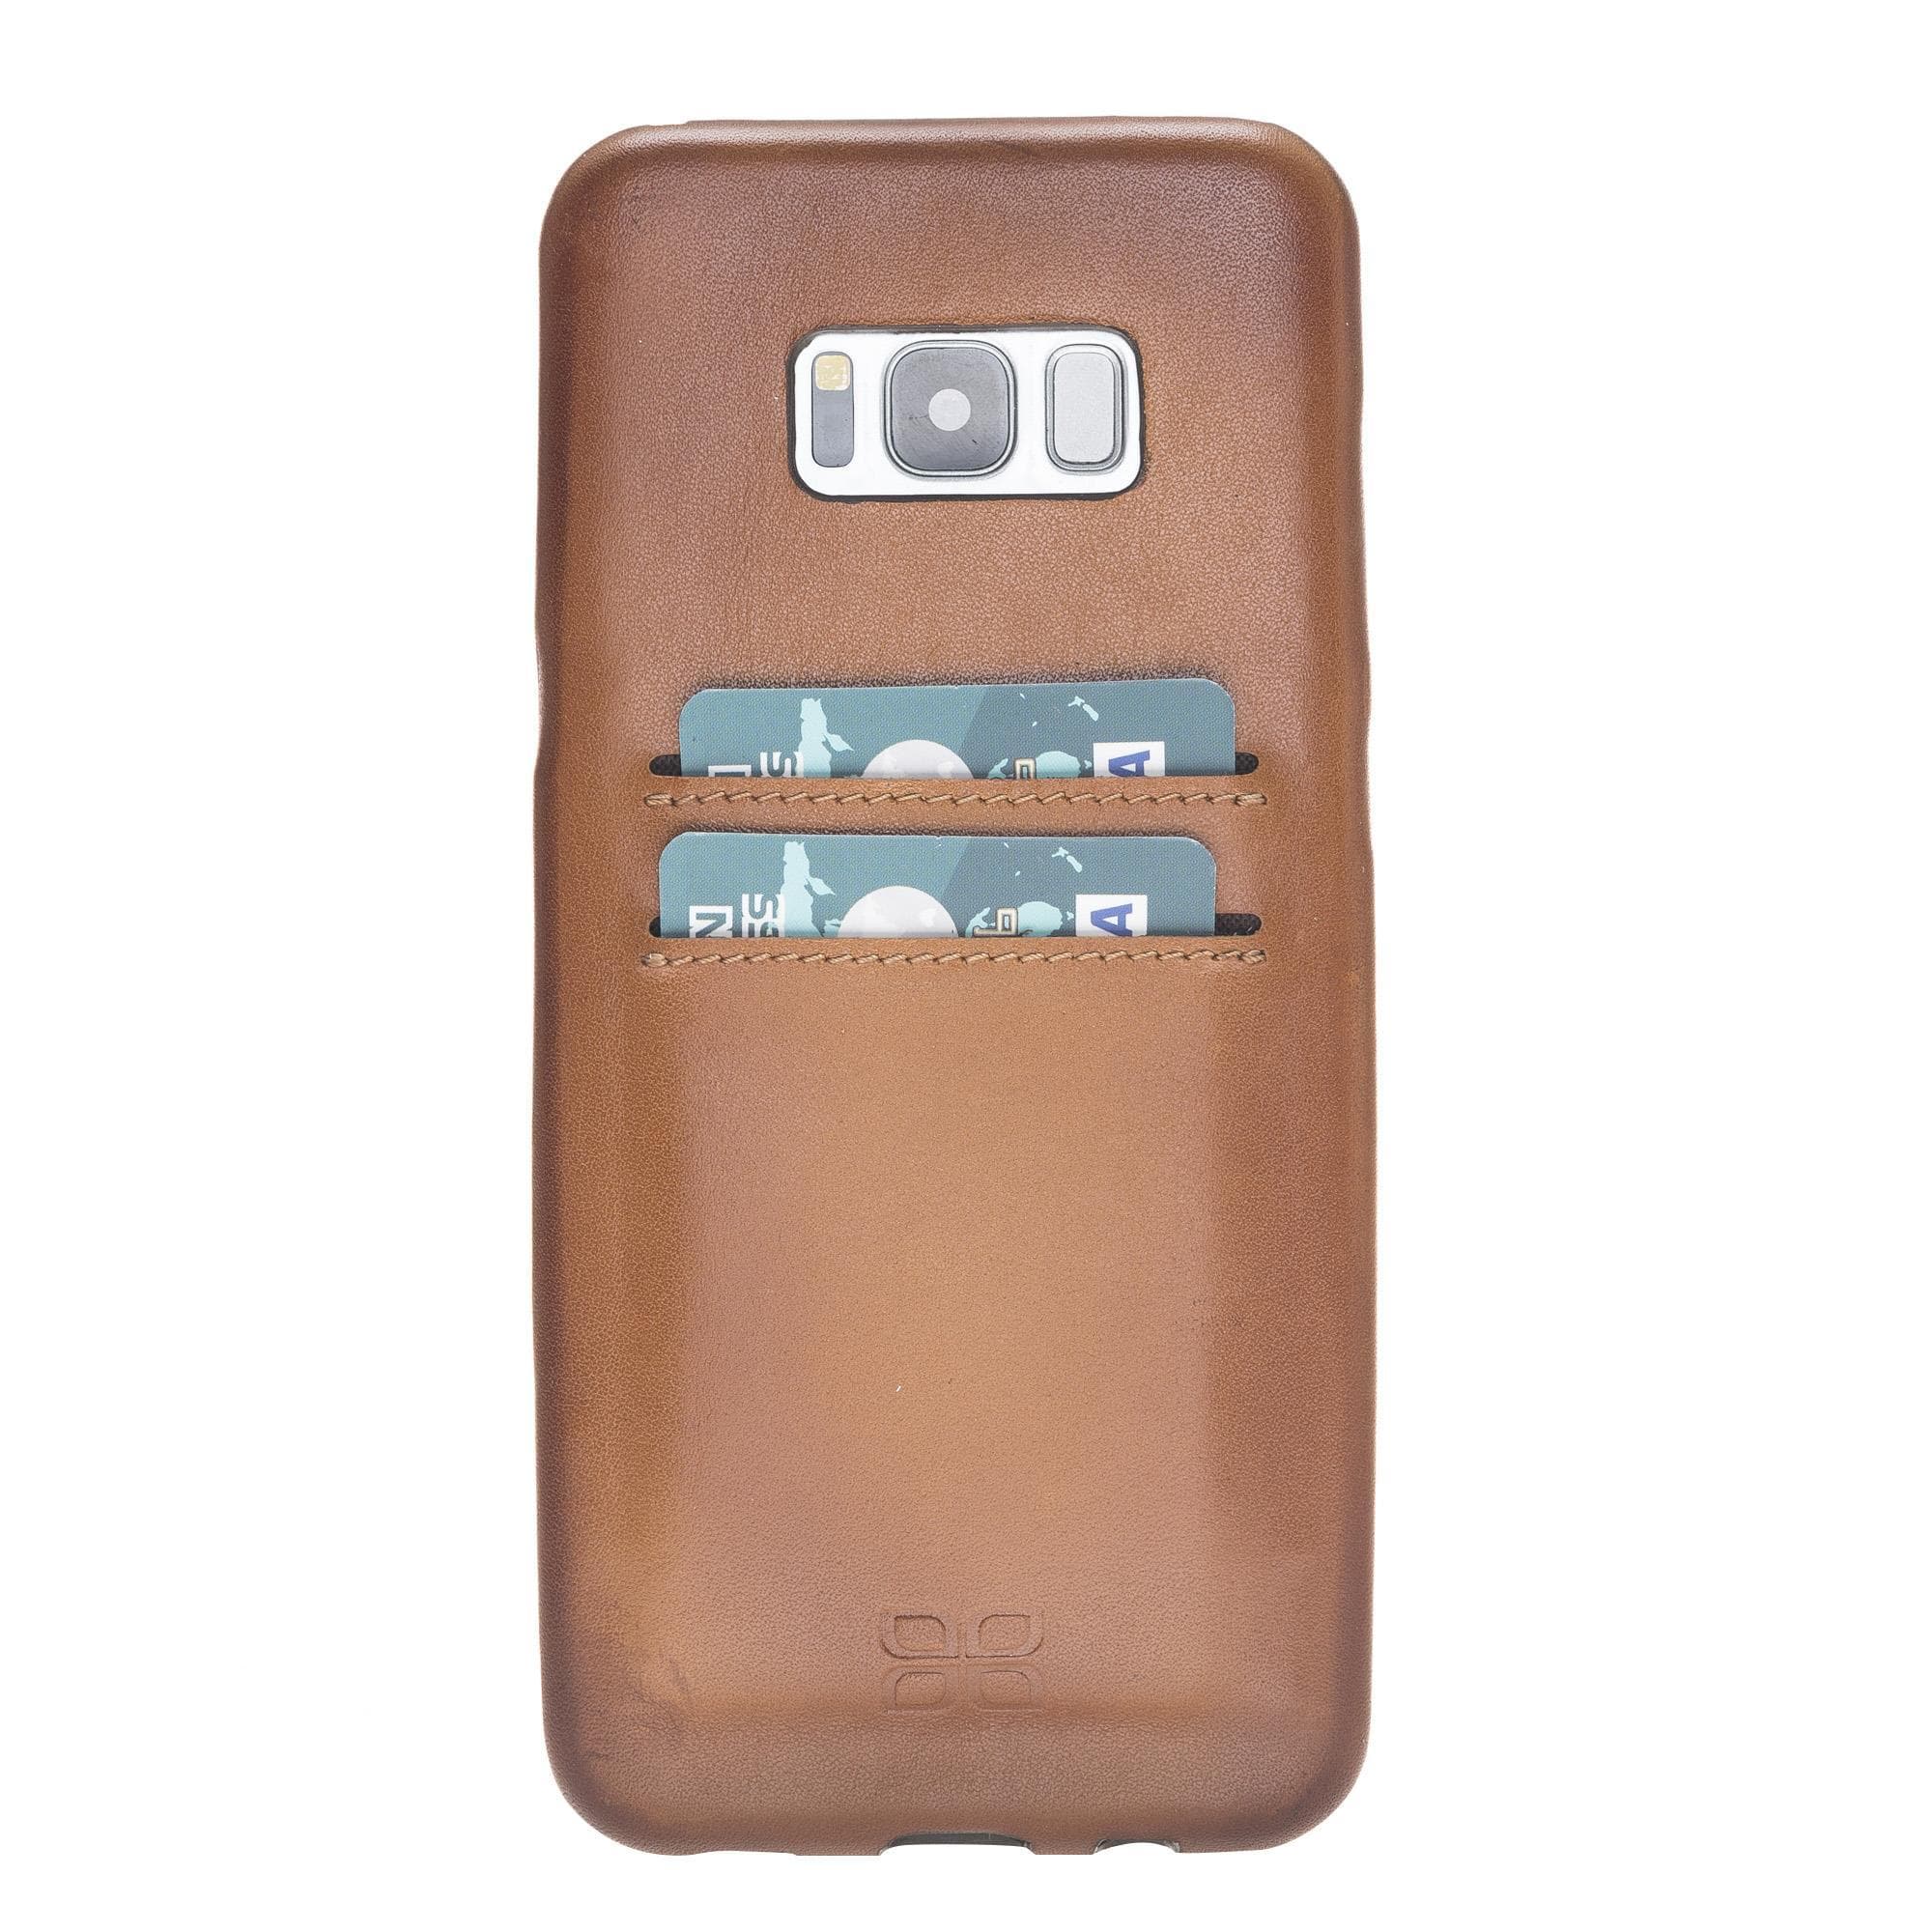 B2B - Samsung Galaxy S8 Plus Leather Case / UCCC - Ultra Cover with Card Holder VAD Bomonti